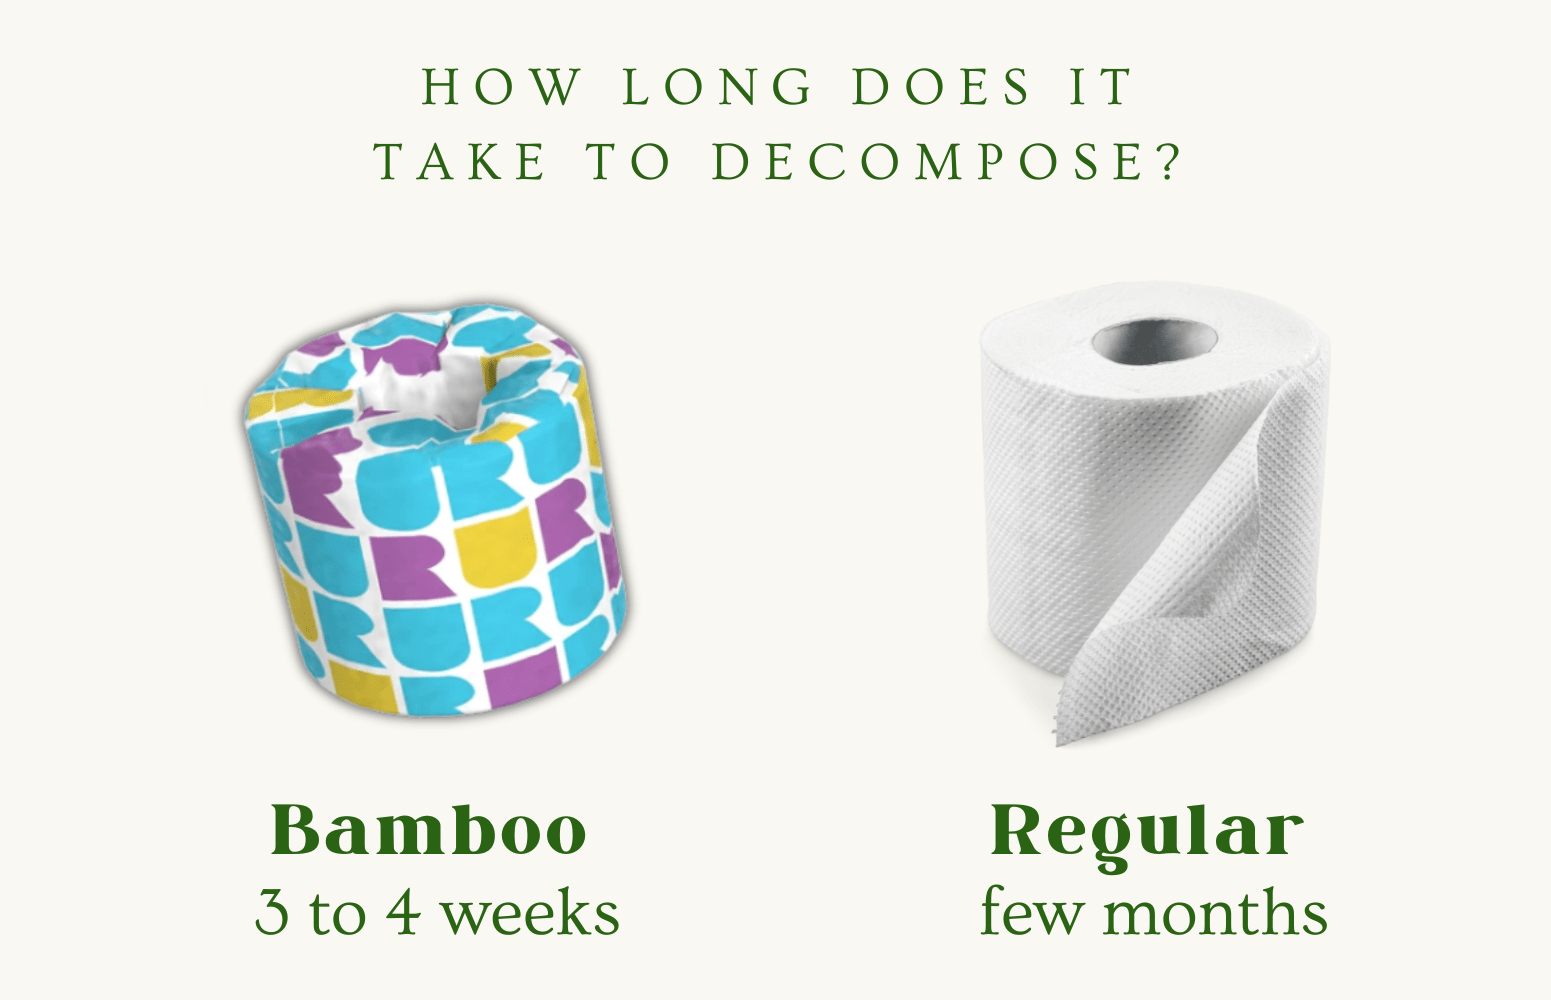 How long does it take to decompose?